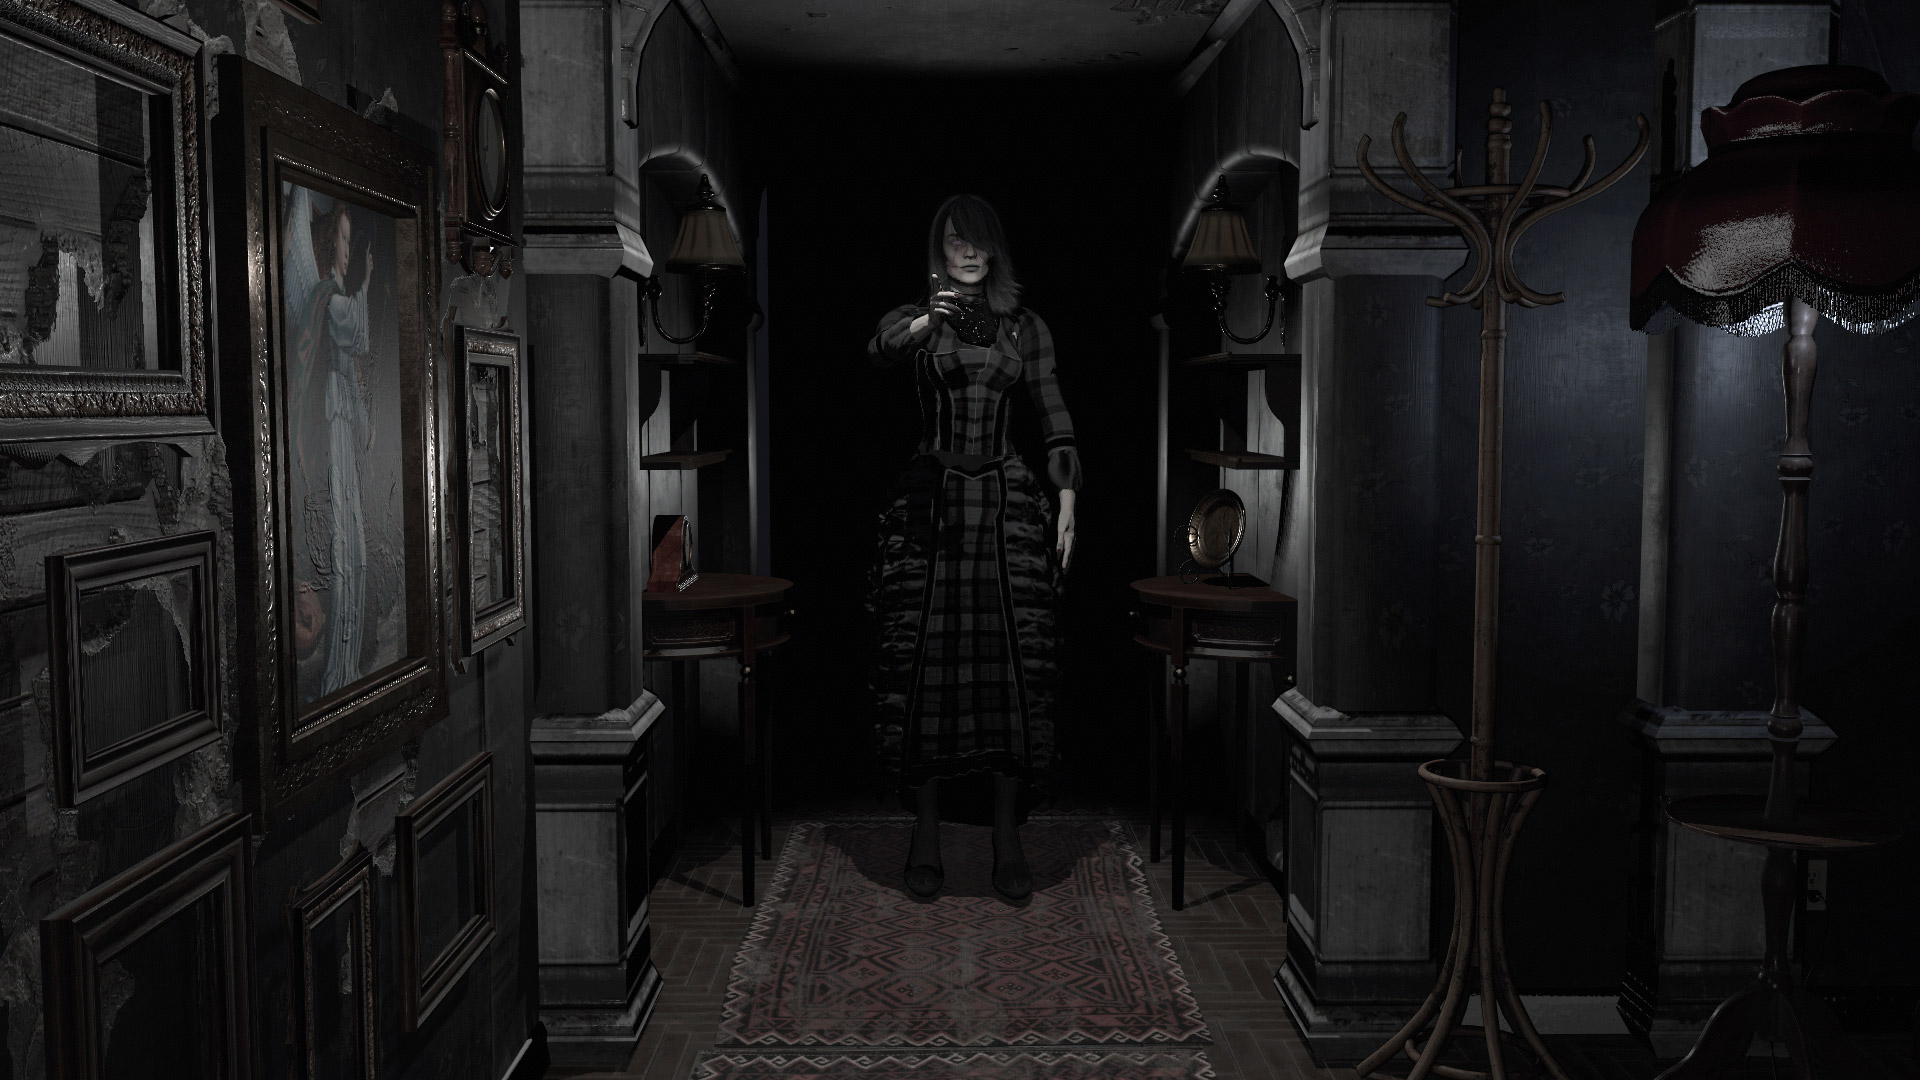 Confronted by the witch Lucilia in an old house in Witching Hour